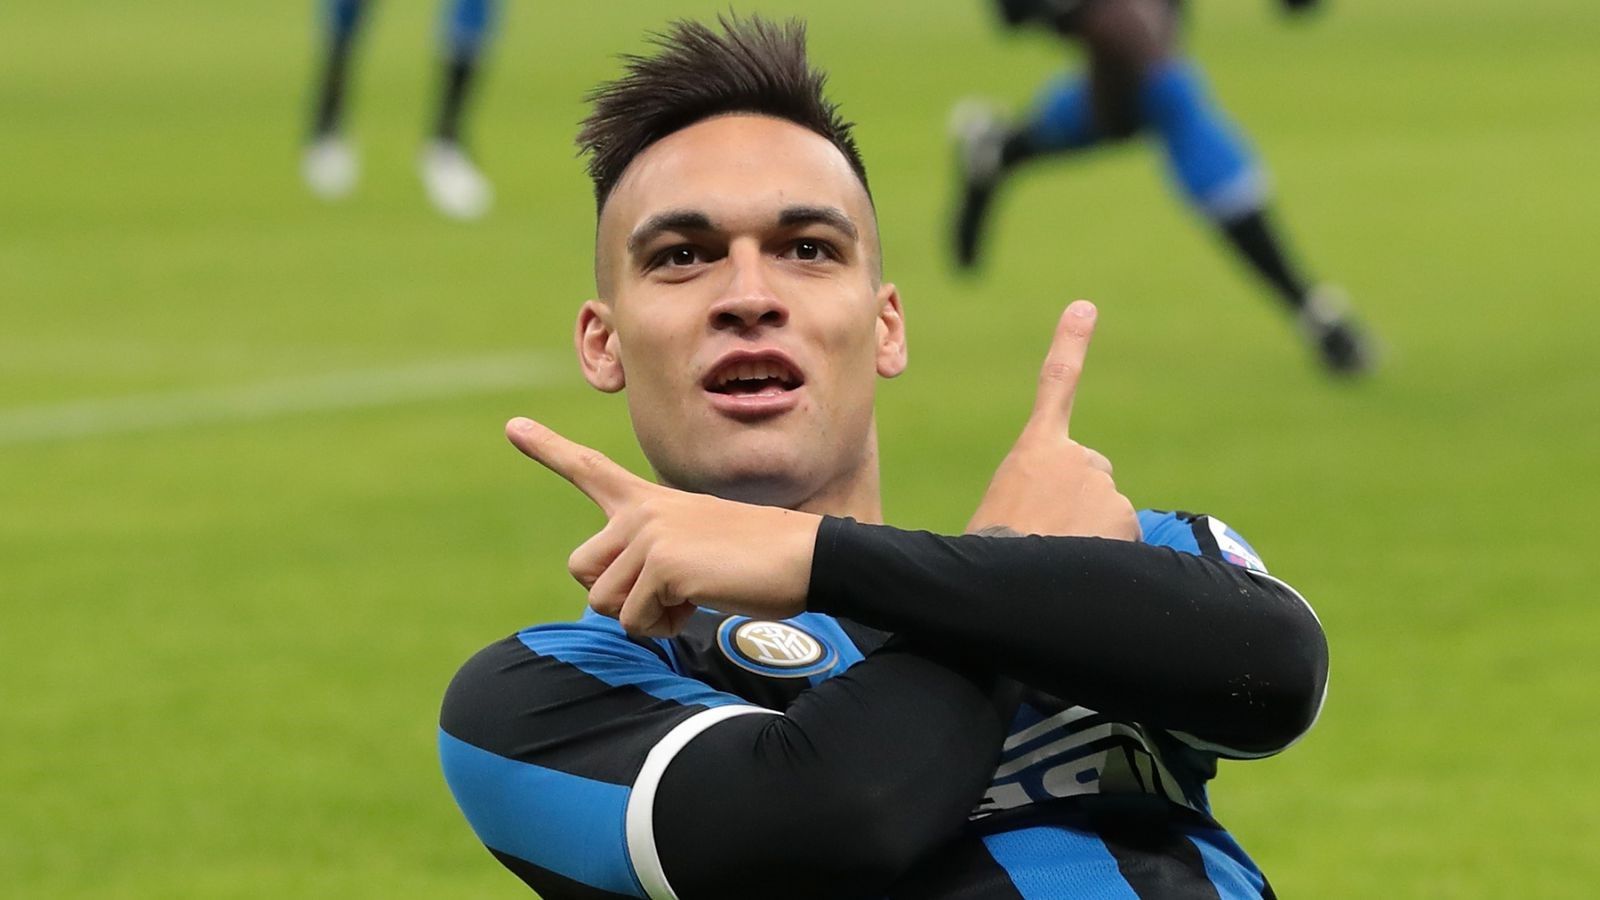 30-facts-about-lautaro-martinez